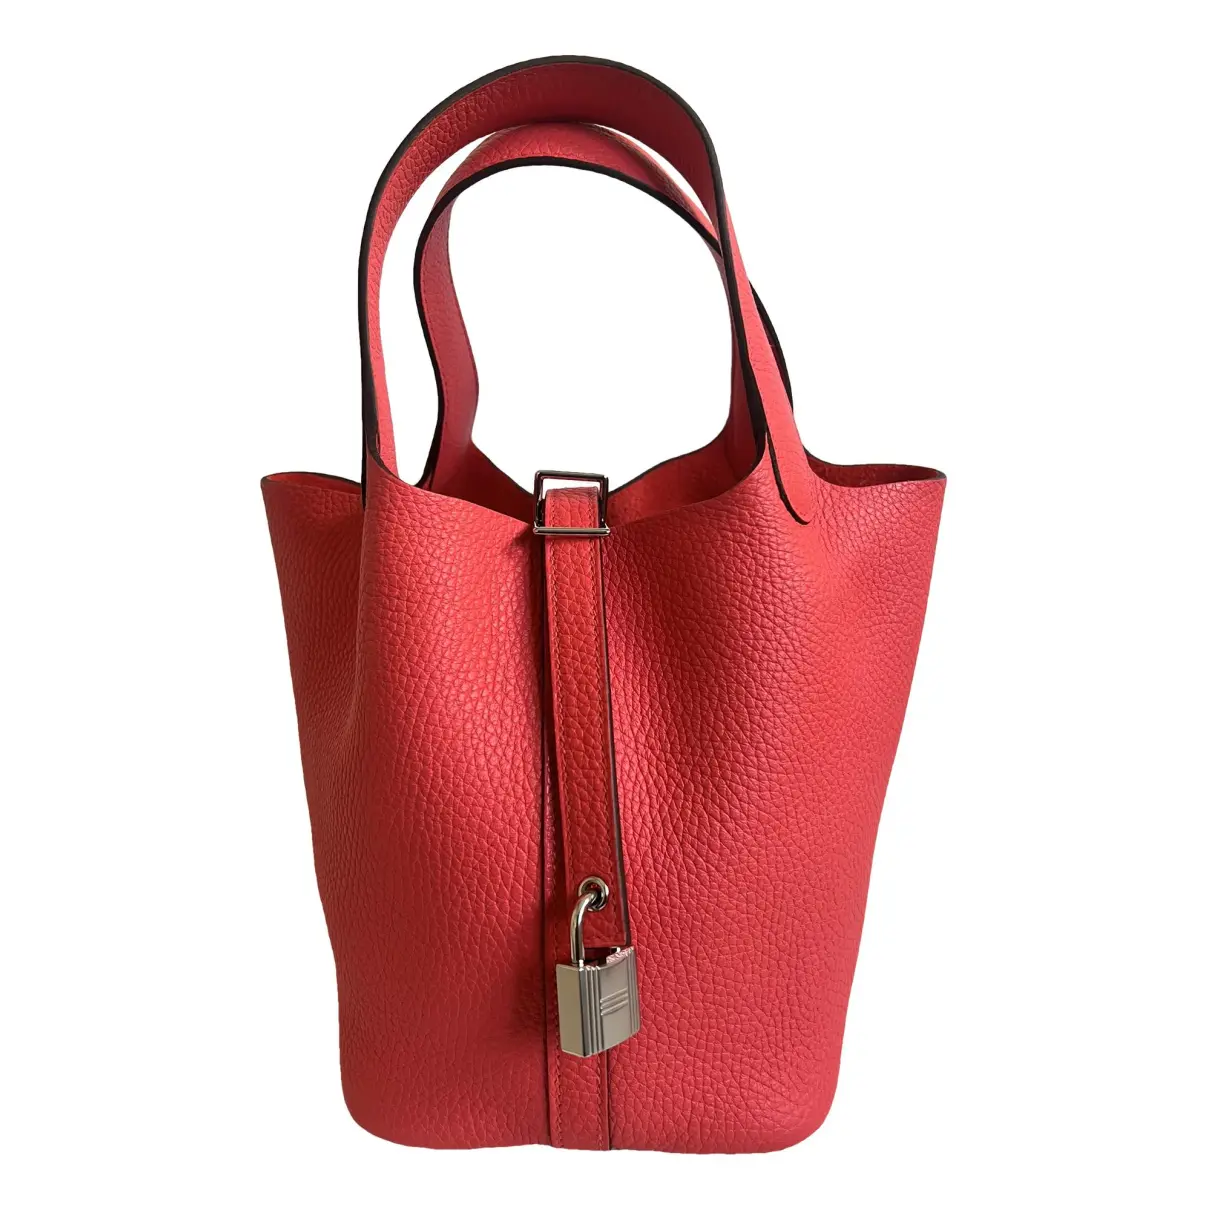 Picotin leather tote